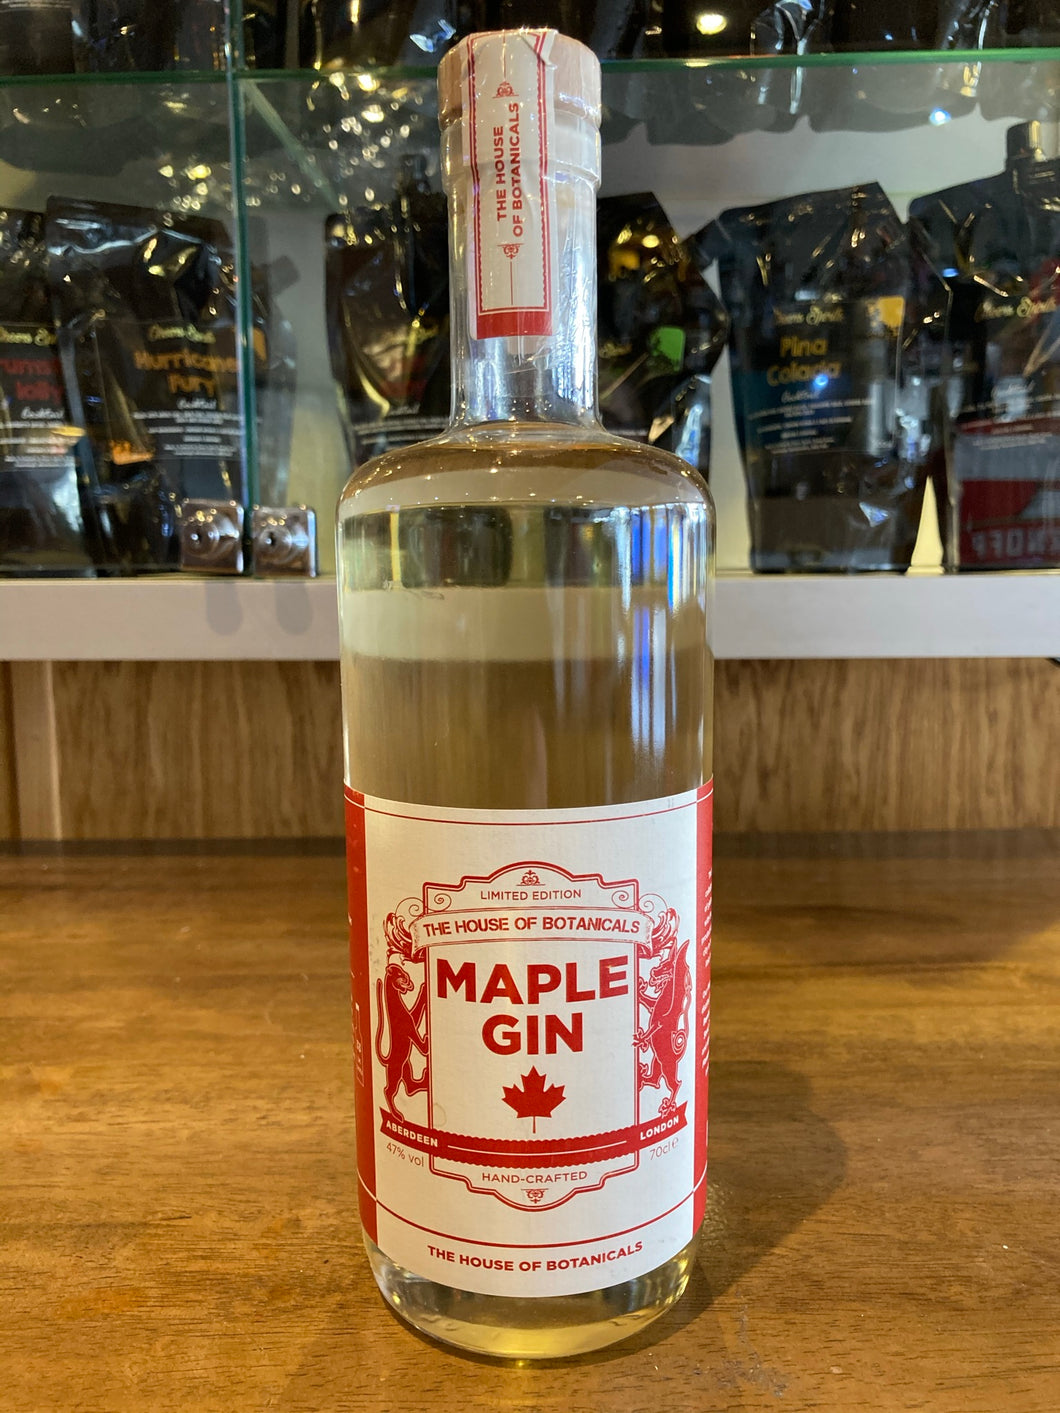 House of Botanicals Maple Old Tom Gin, 47.0% abv